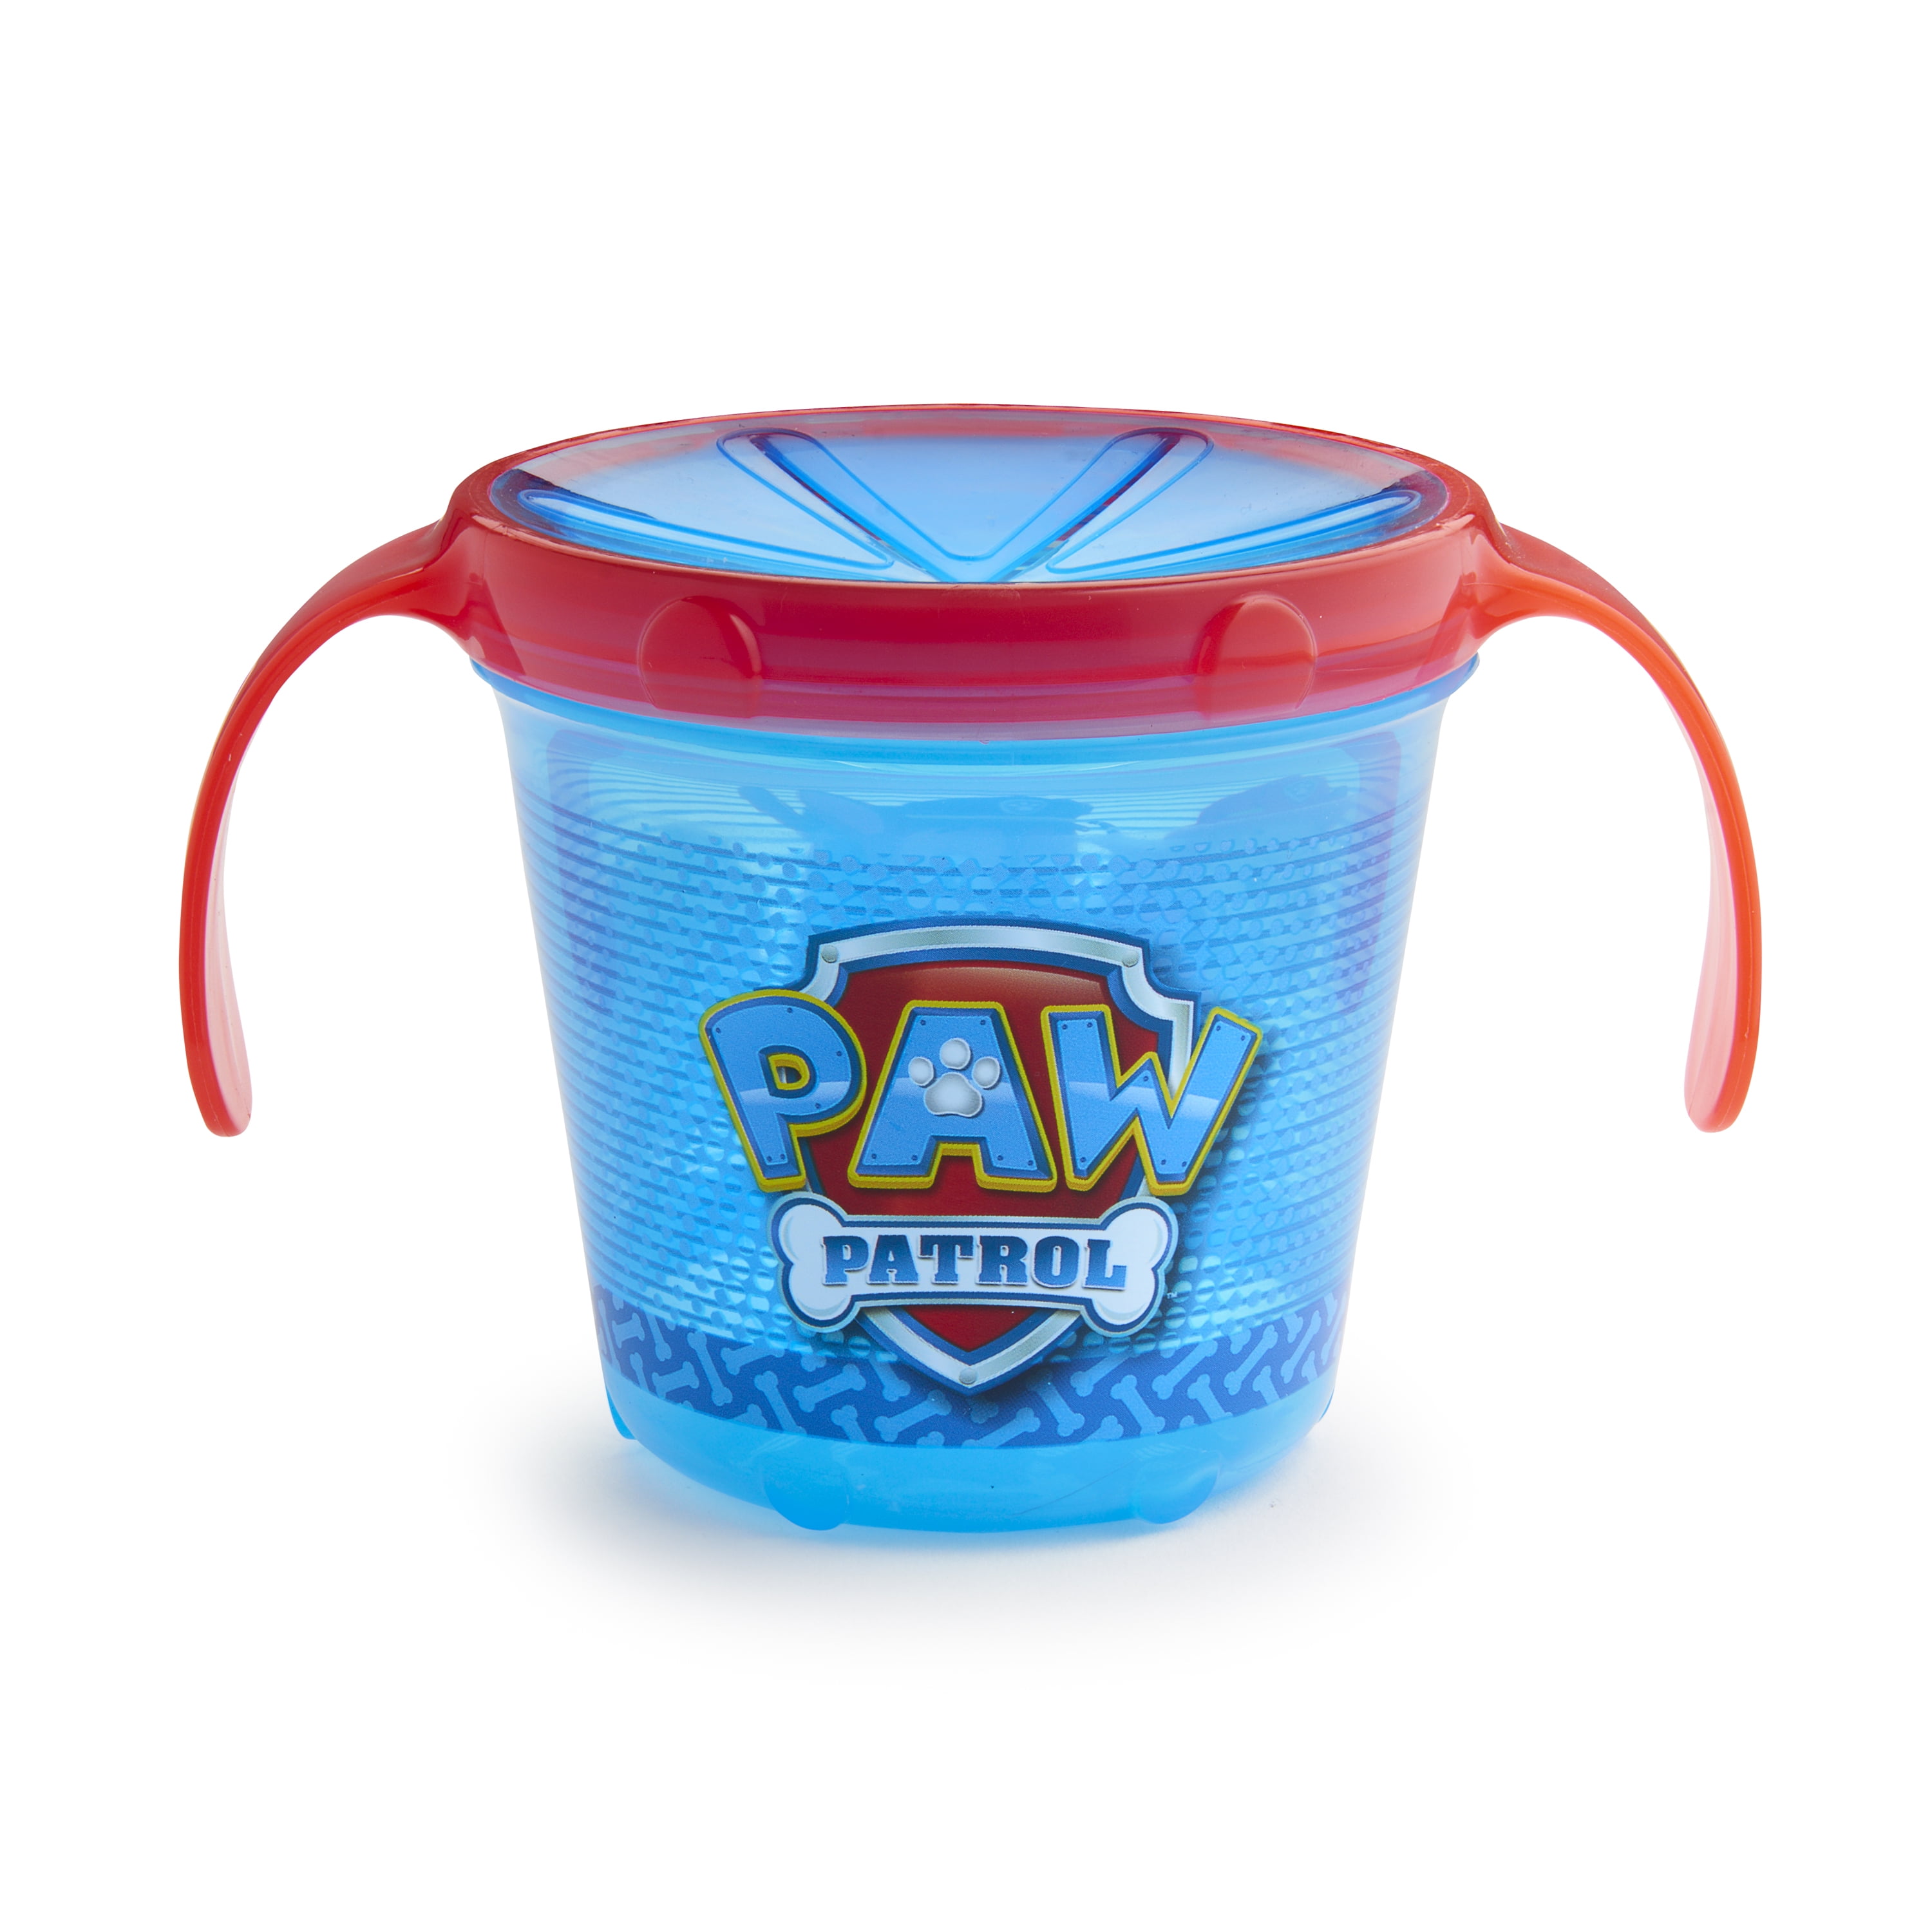 snack-table-from-a-paw-patrol-birthday-party-pawpatrol-snacktable